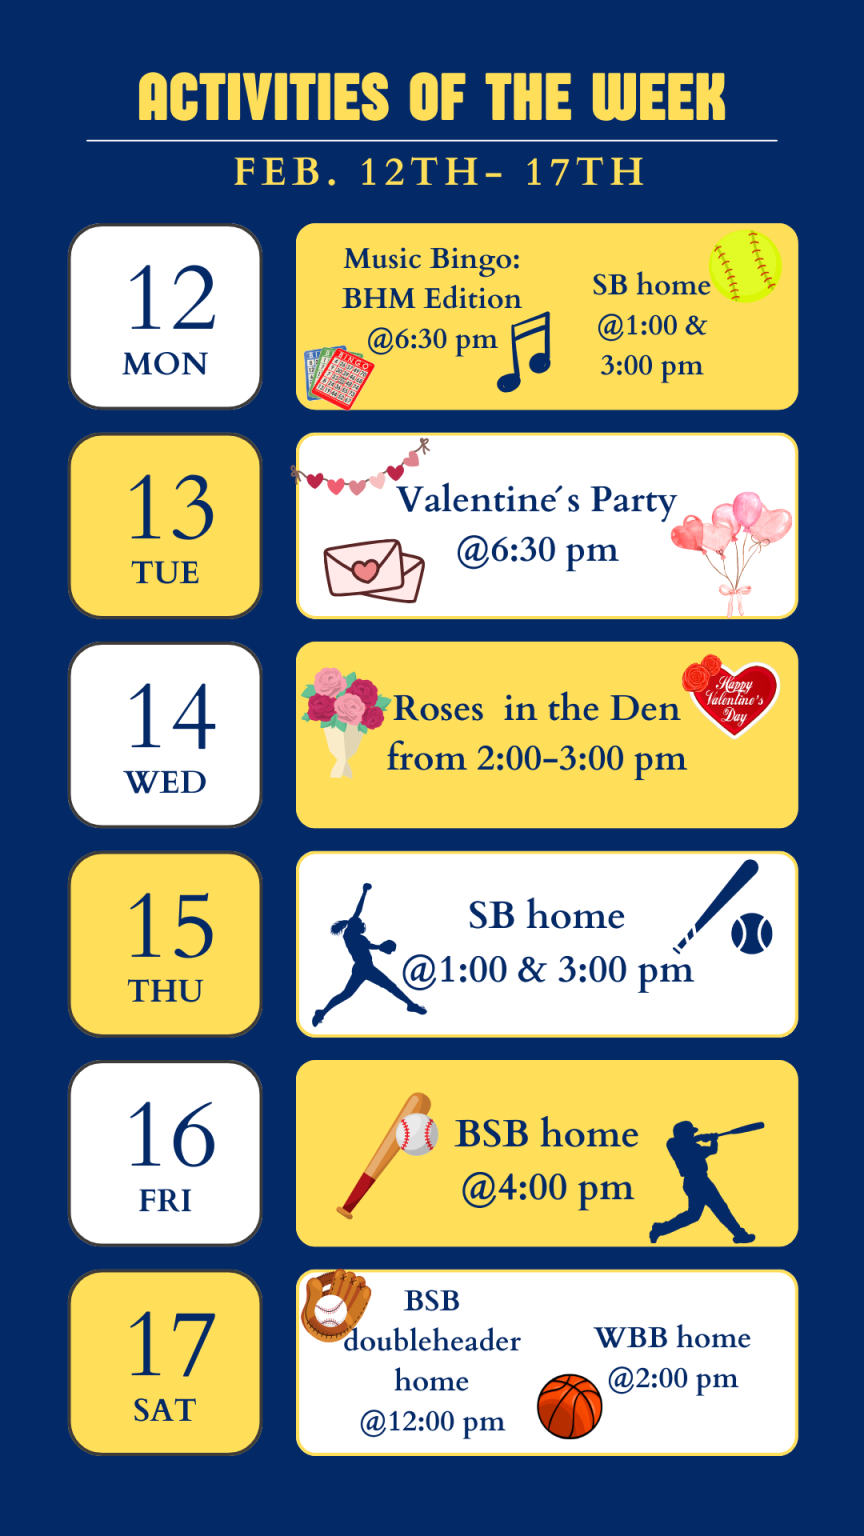 Events of the week. Feb. 12th-17th.